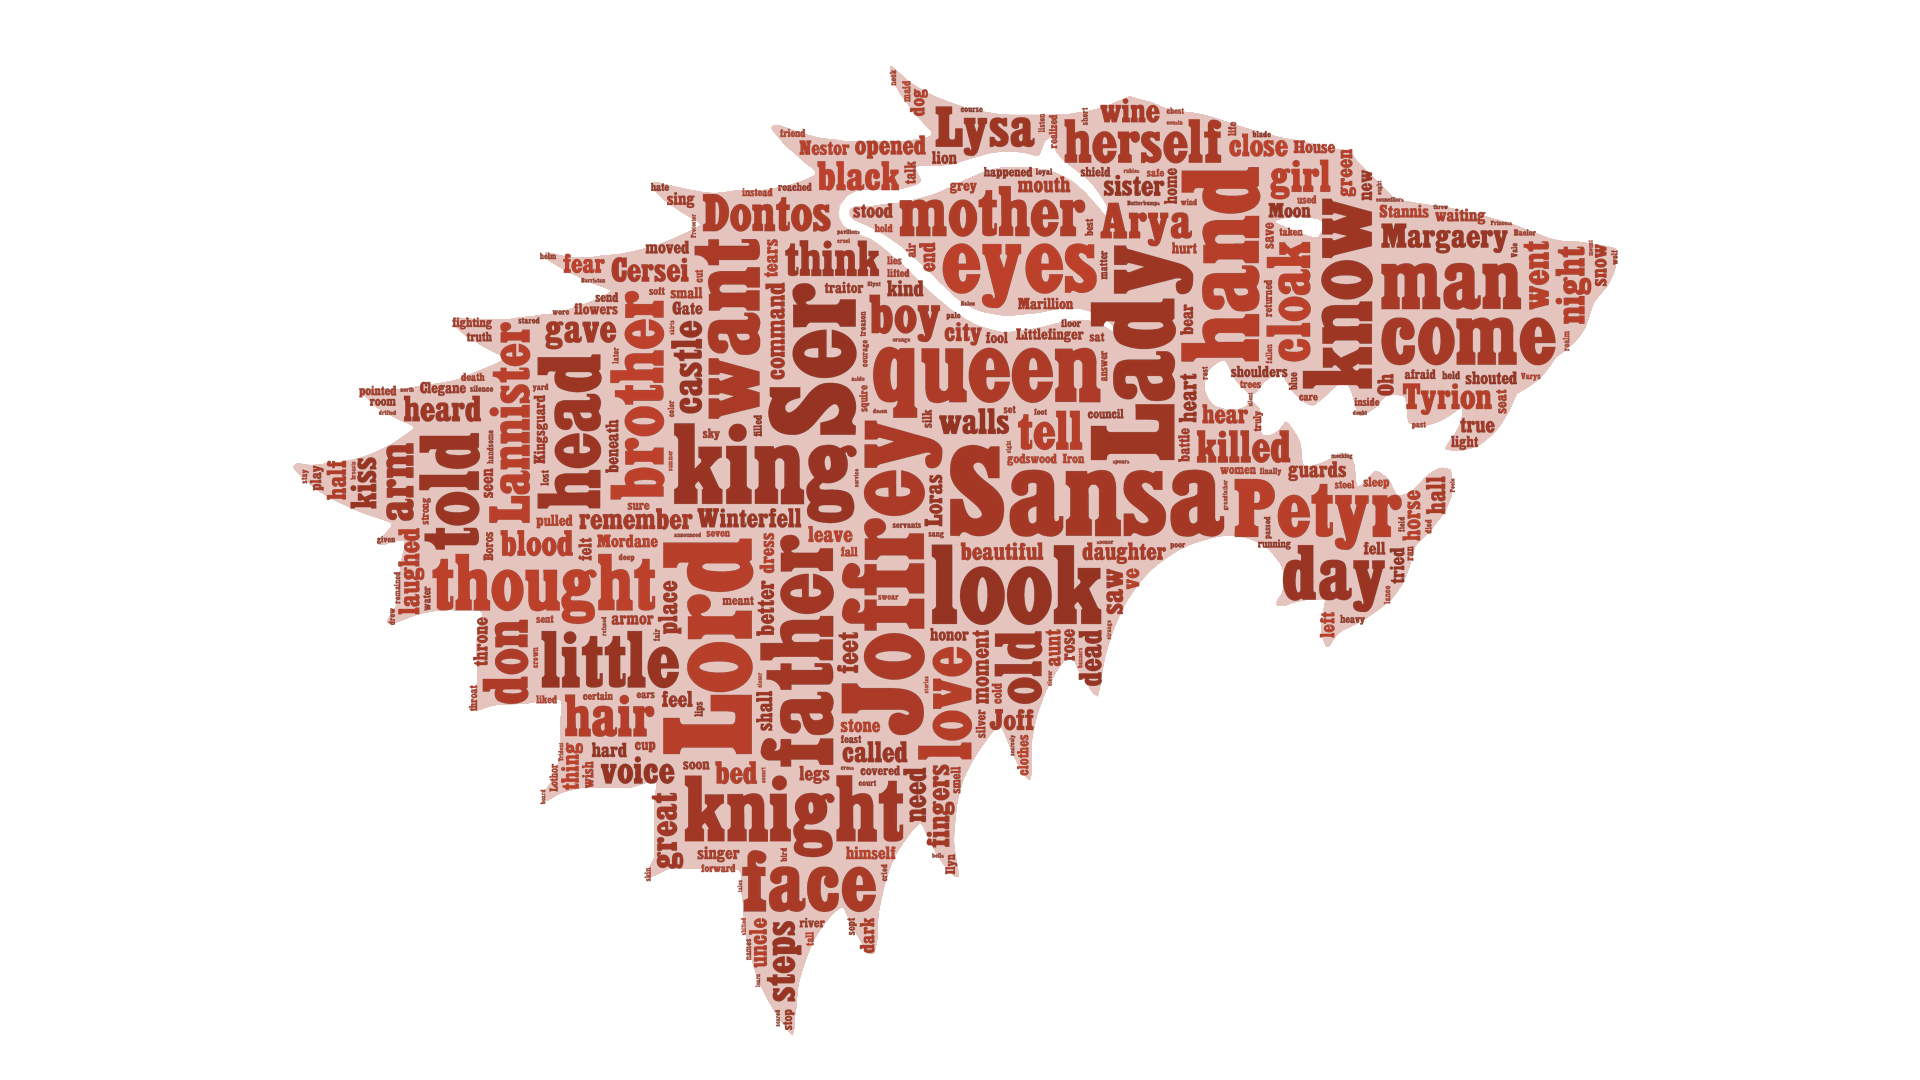 A Song Of Ice And Fire Image Asoiaf Word Cloud Sansa Stark HD